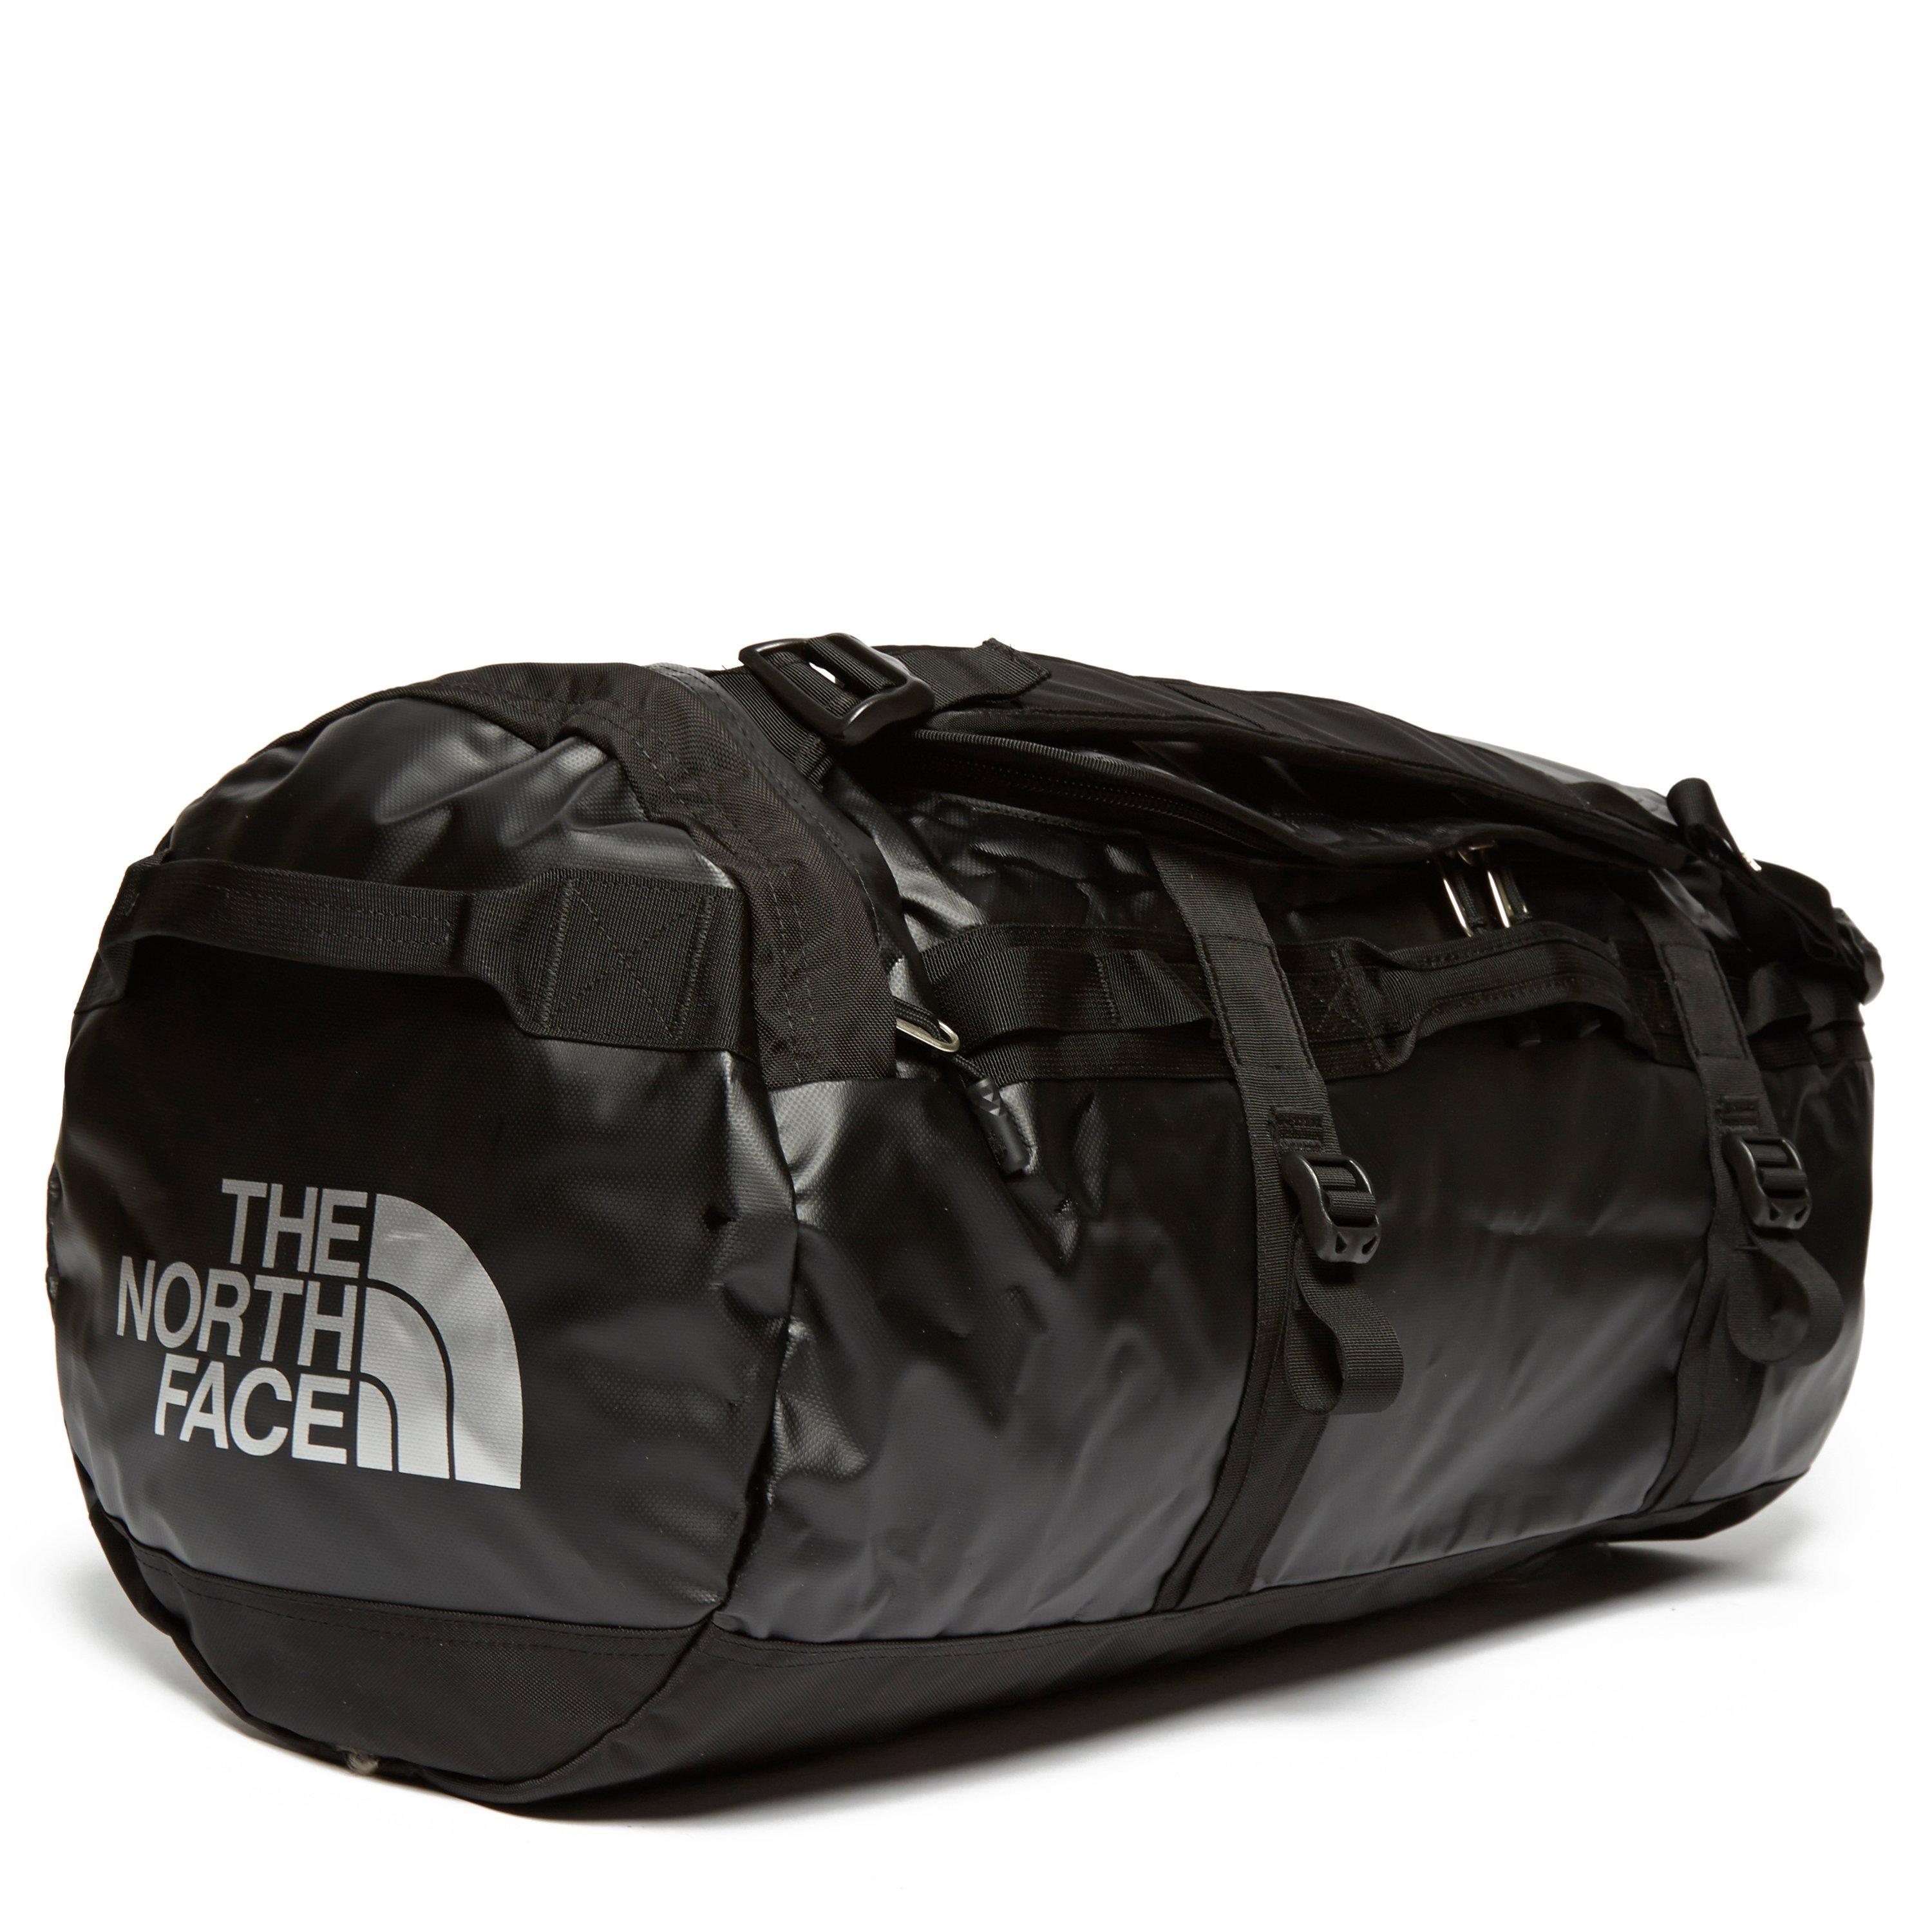 The North Face Basecamp Duffel Bag (Large)